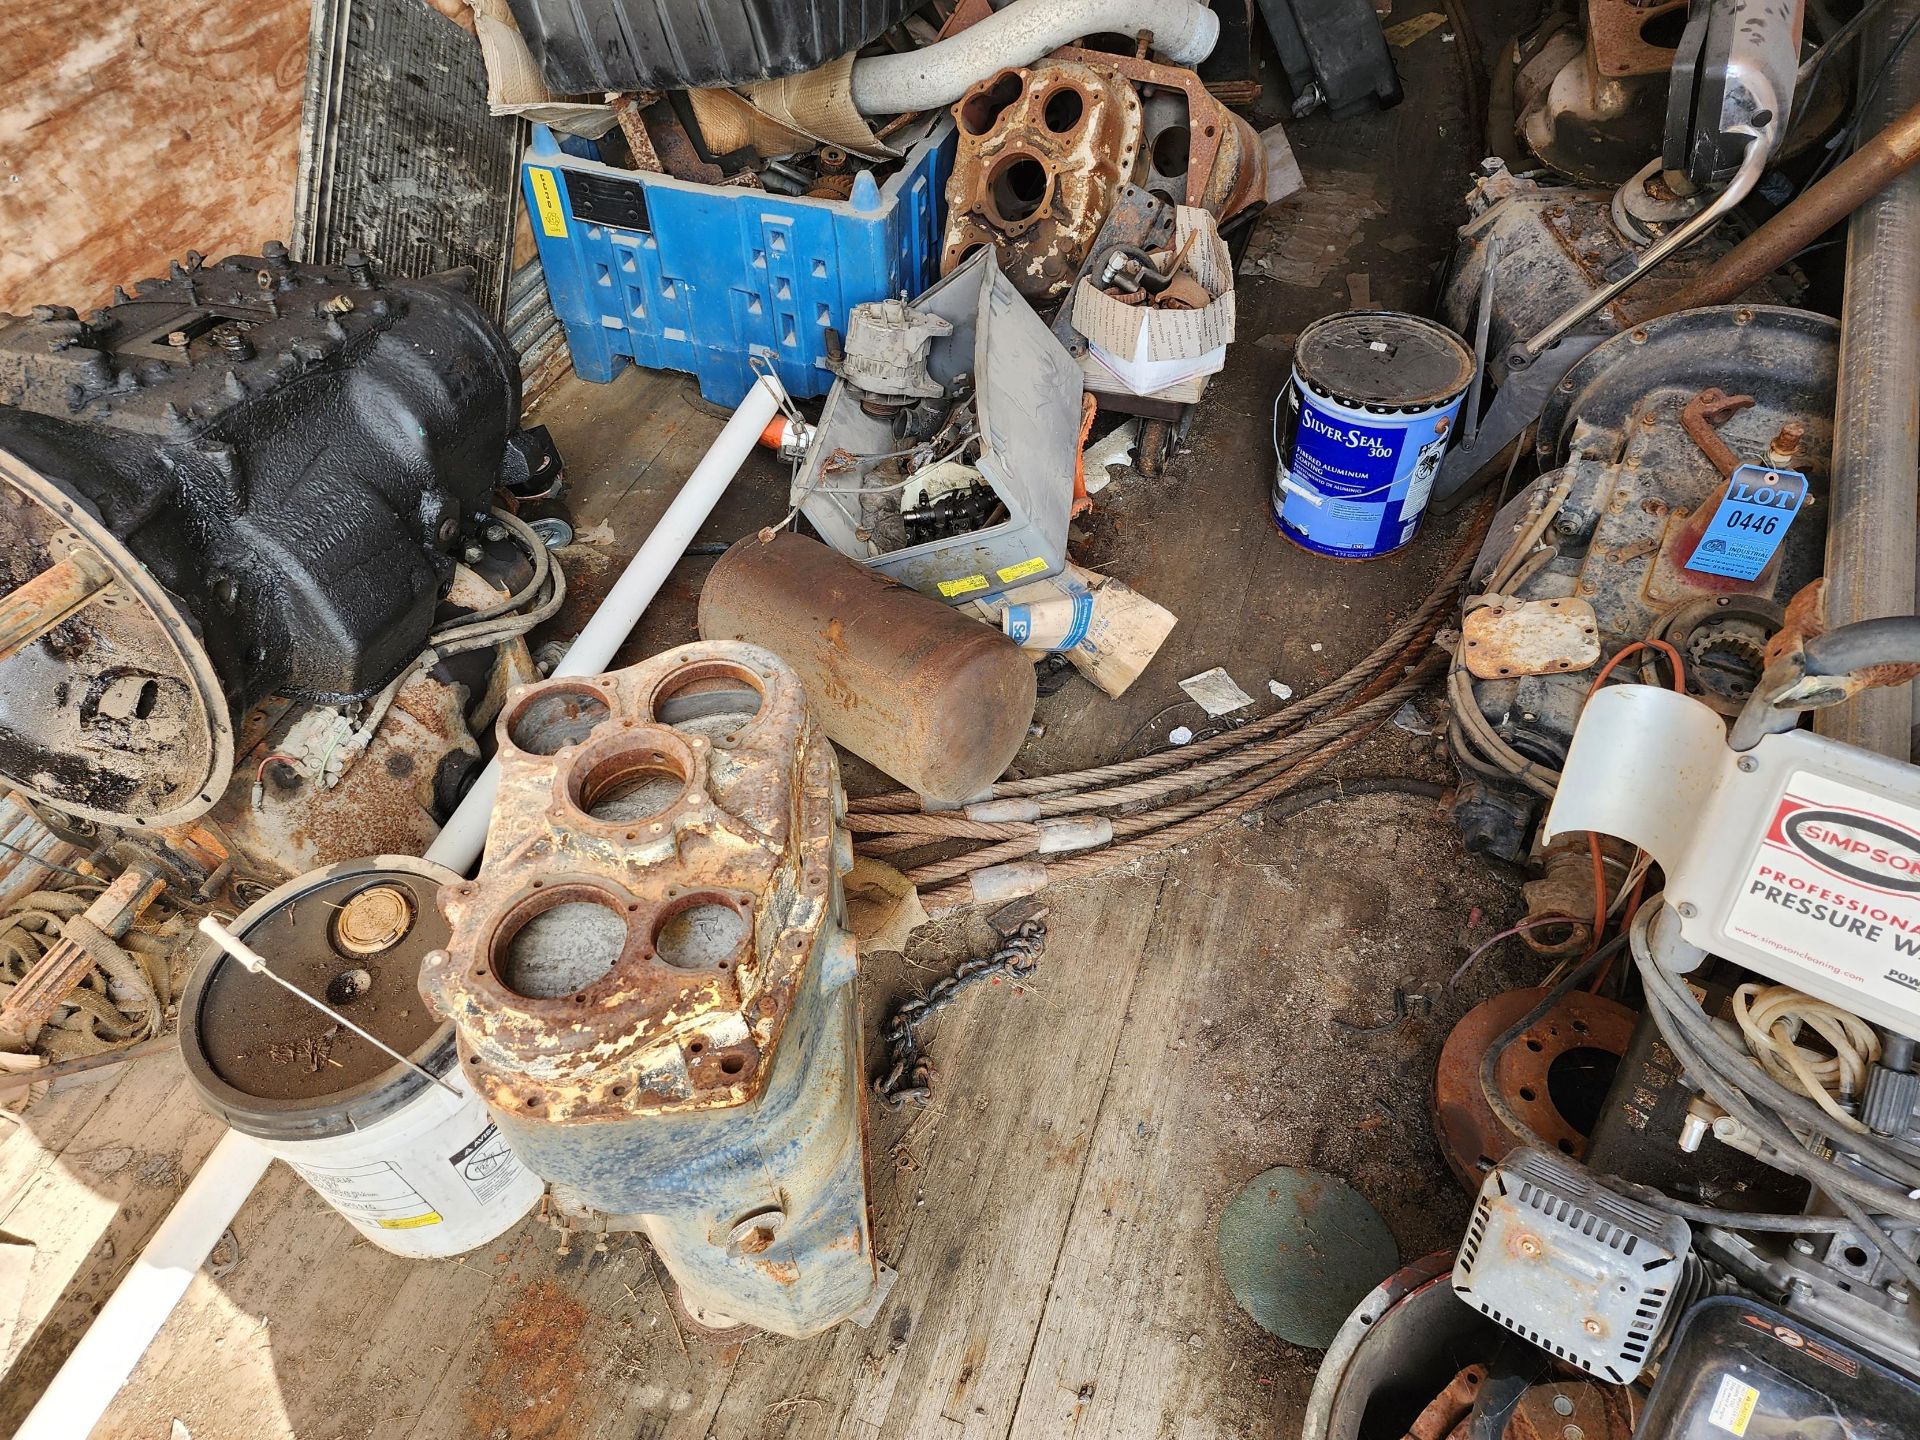 (LOT) CONTENTS OF TRAILER - TRUCK PARTS, TRANSMISSIONS, GEAR CASES AND OTHER - Image 12 of 16